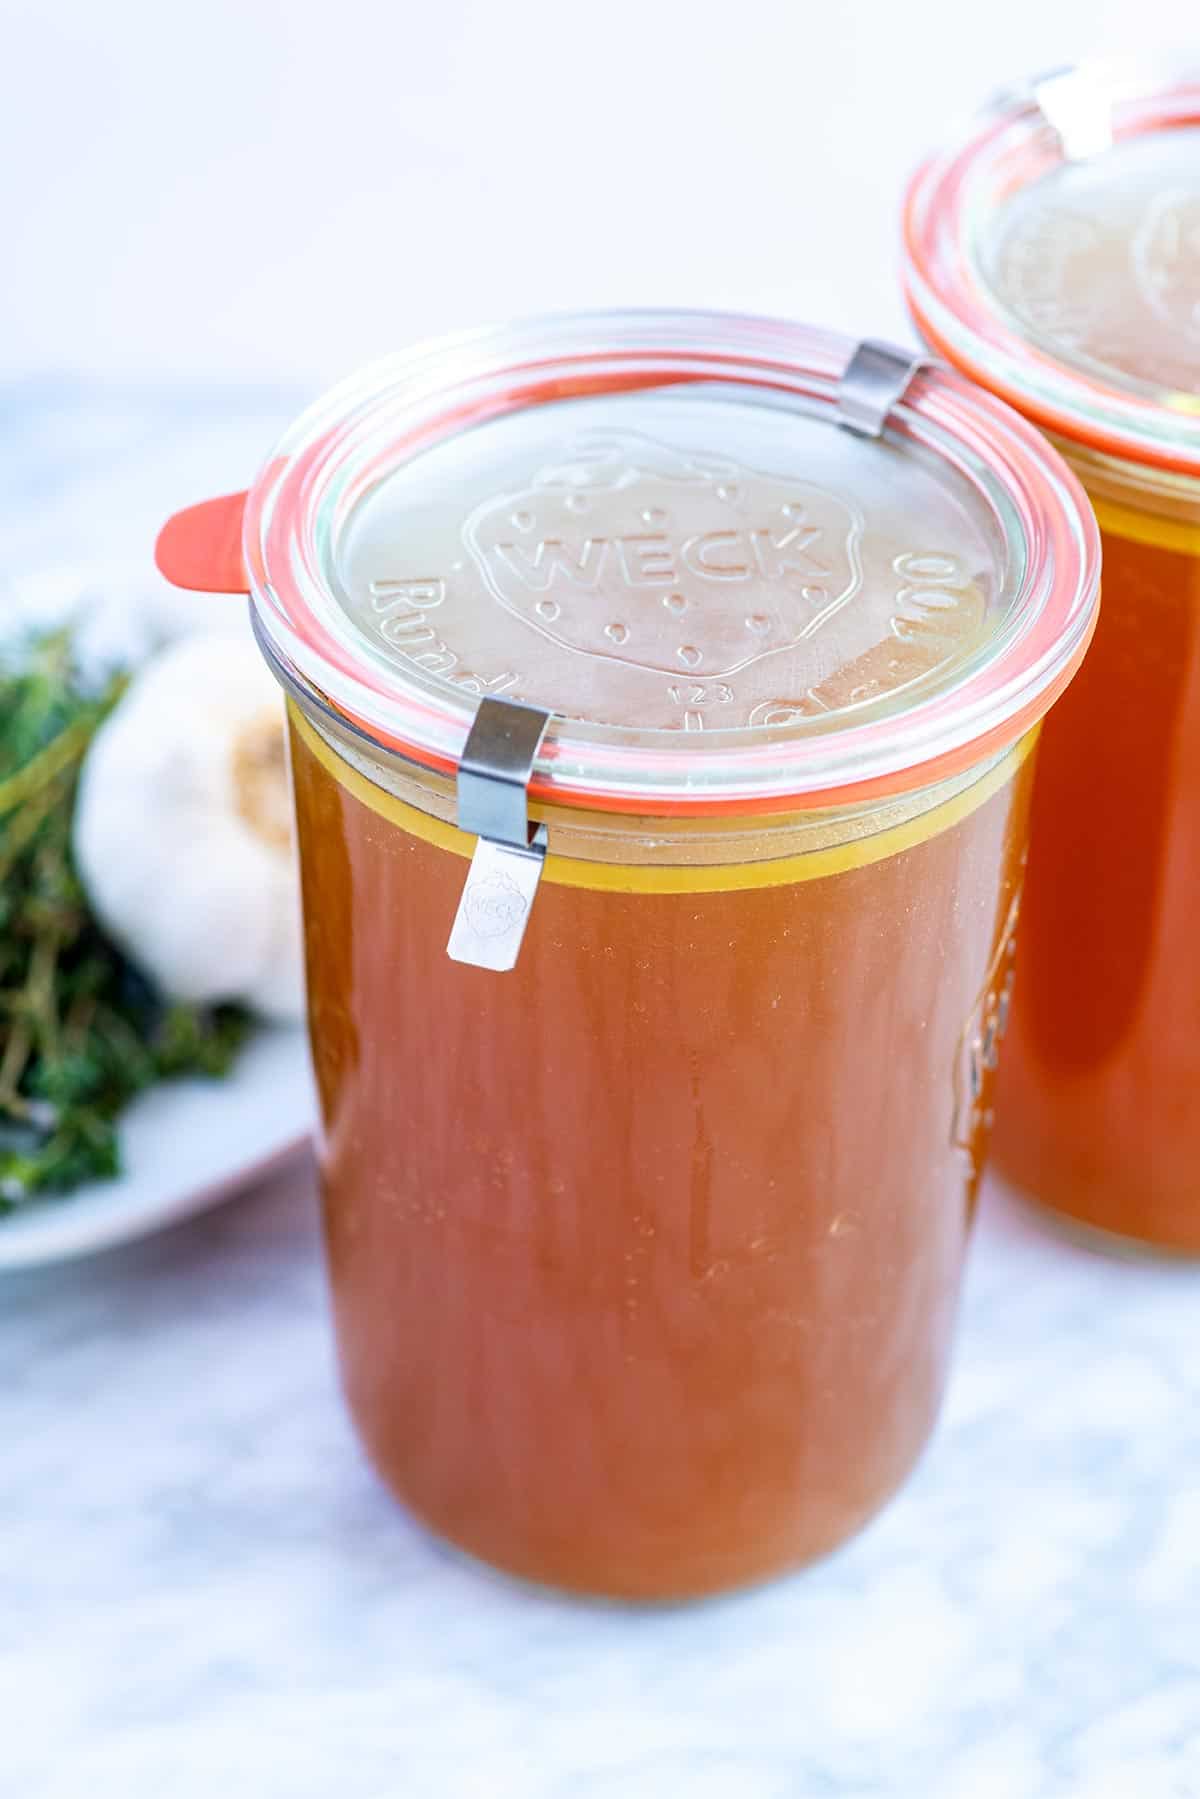 This homemade chicken stock will knock the socks of anything you can buy at the store. Use leftover bones or use chicken parts.